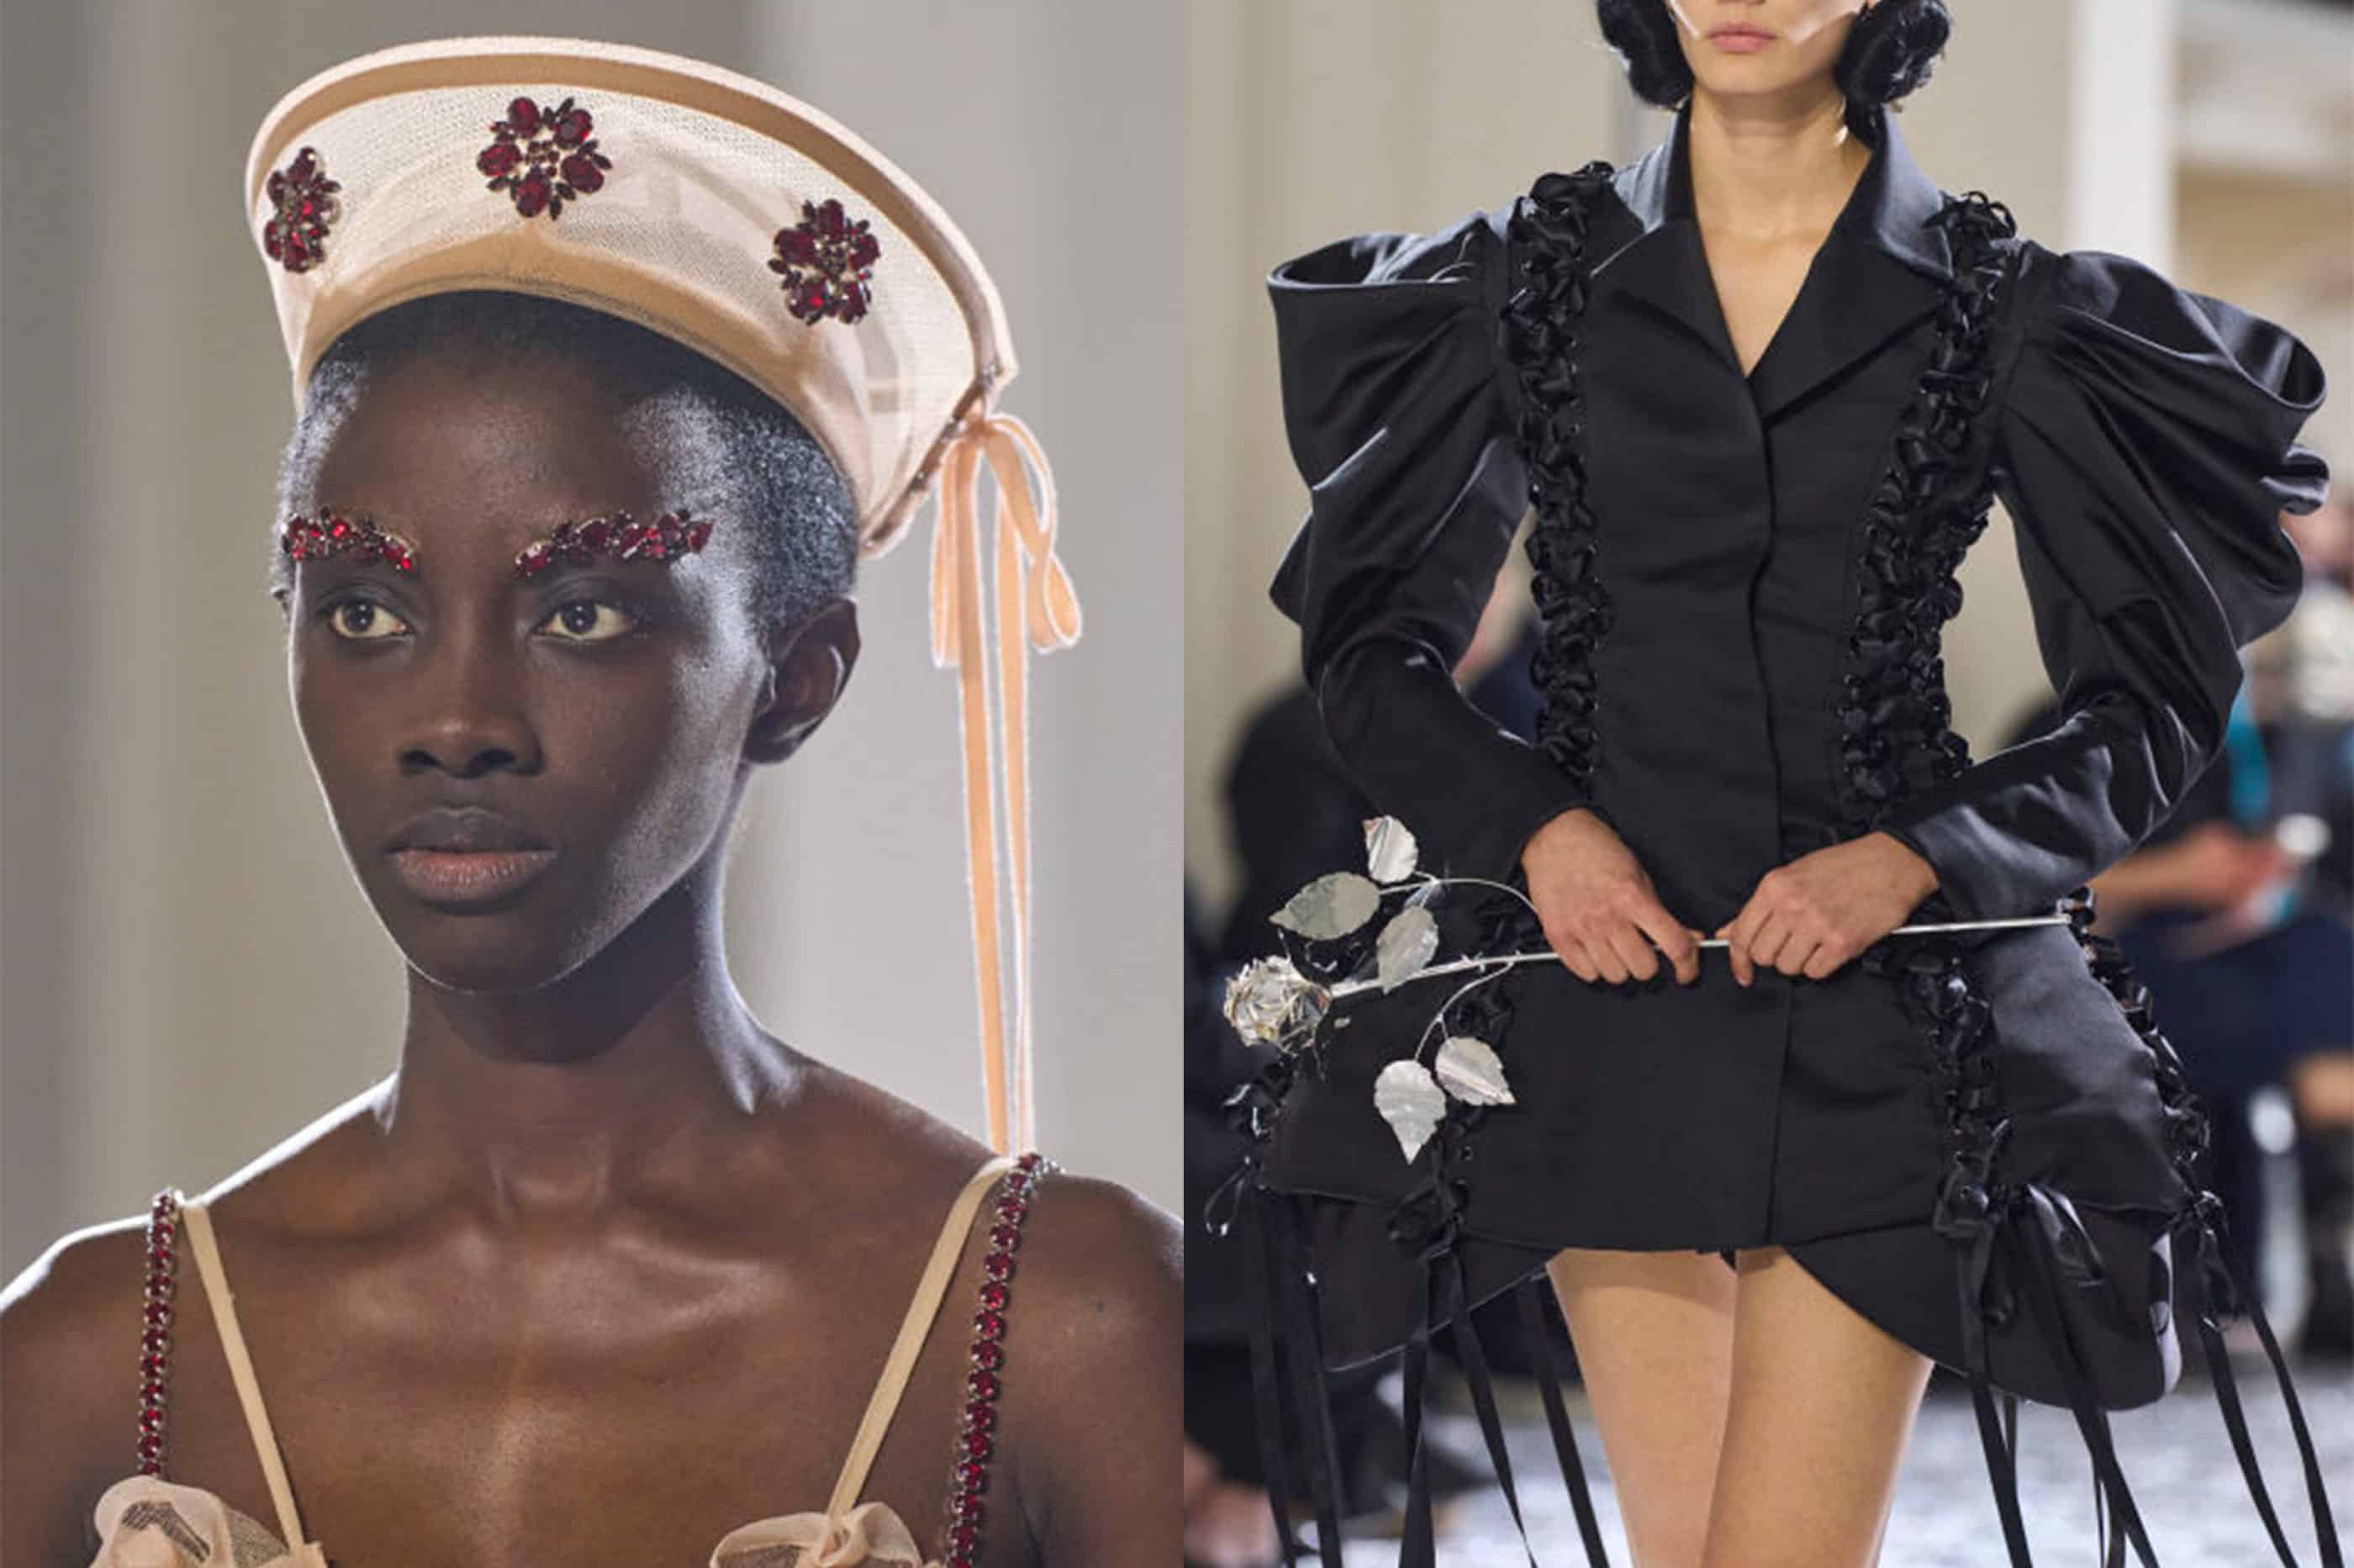 Simone Rocha delivers a 19th-century inspired Jean Paul Gaultier couture collection